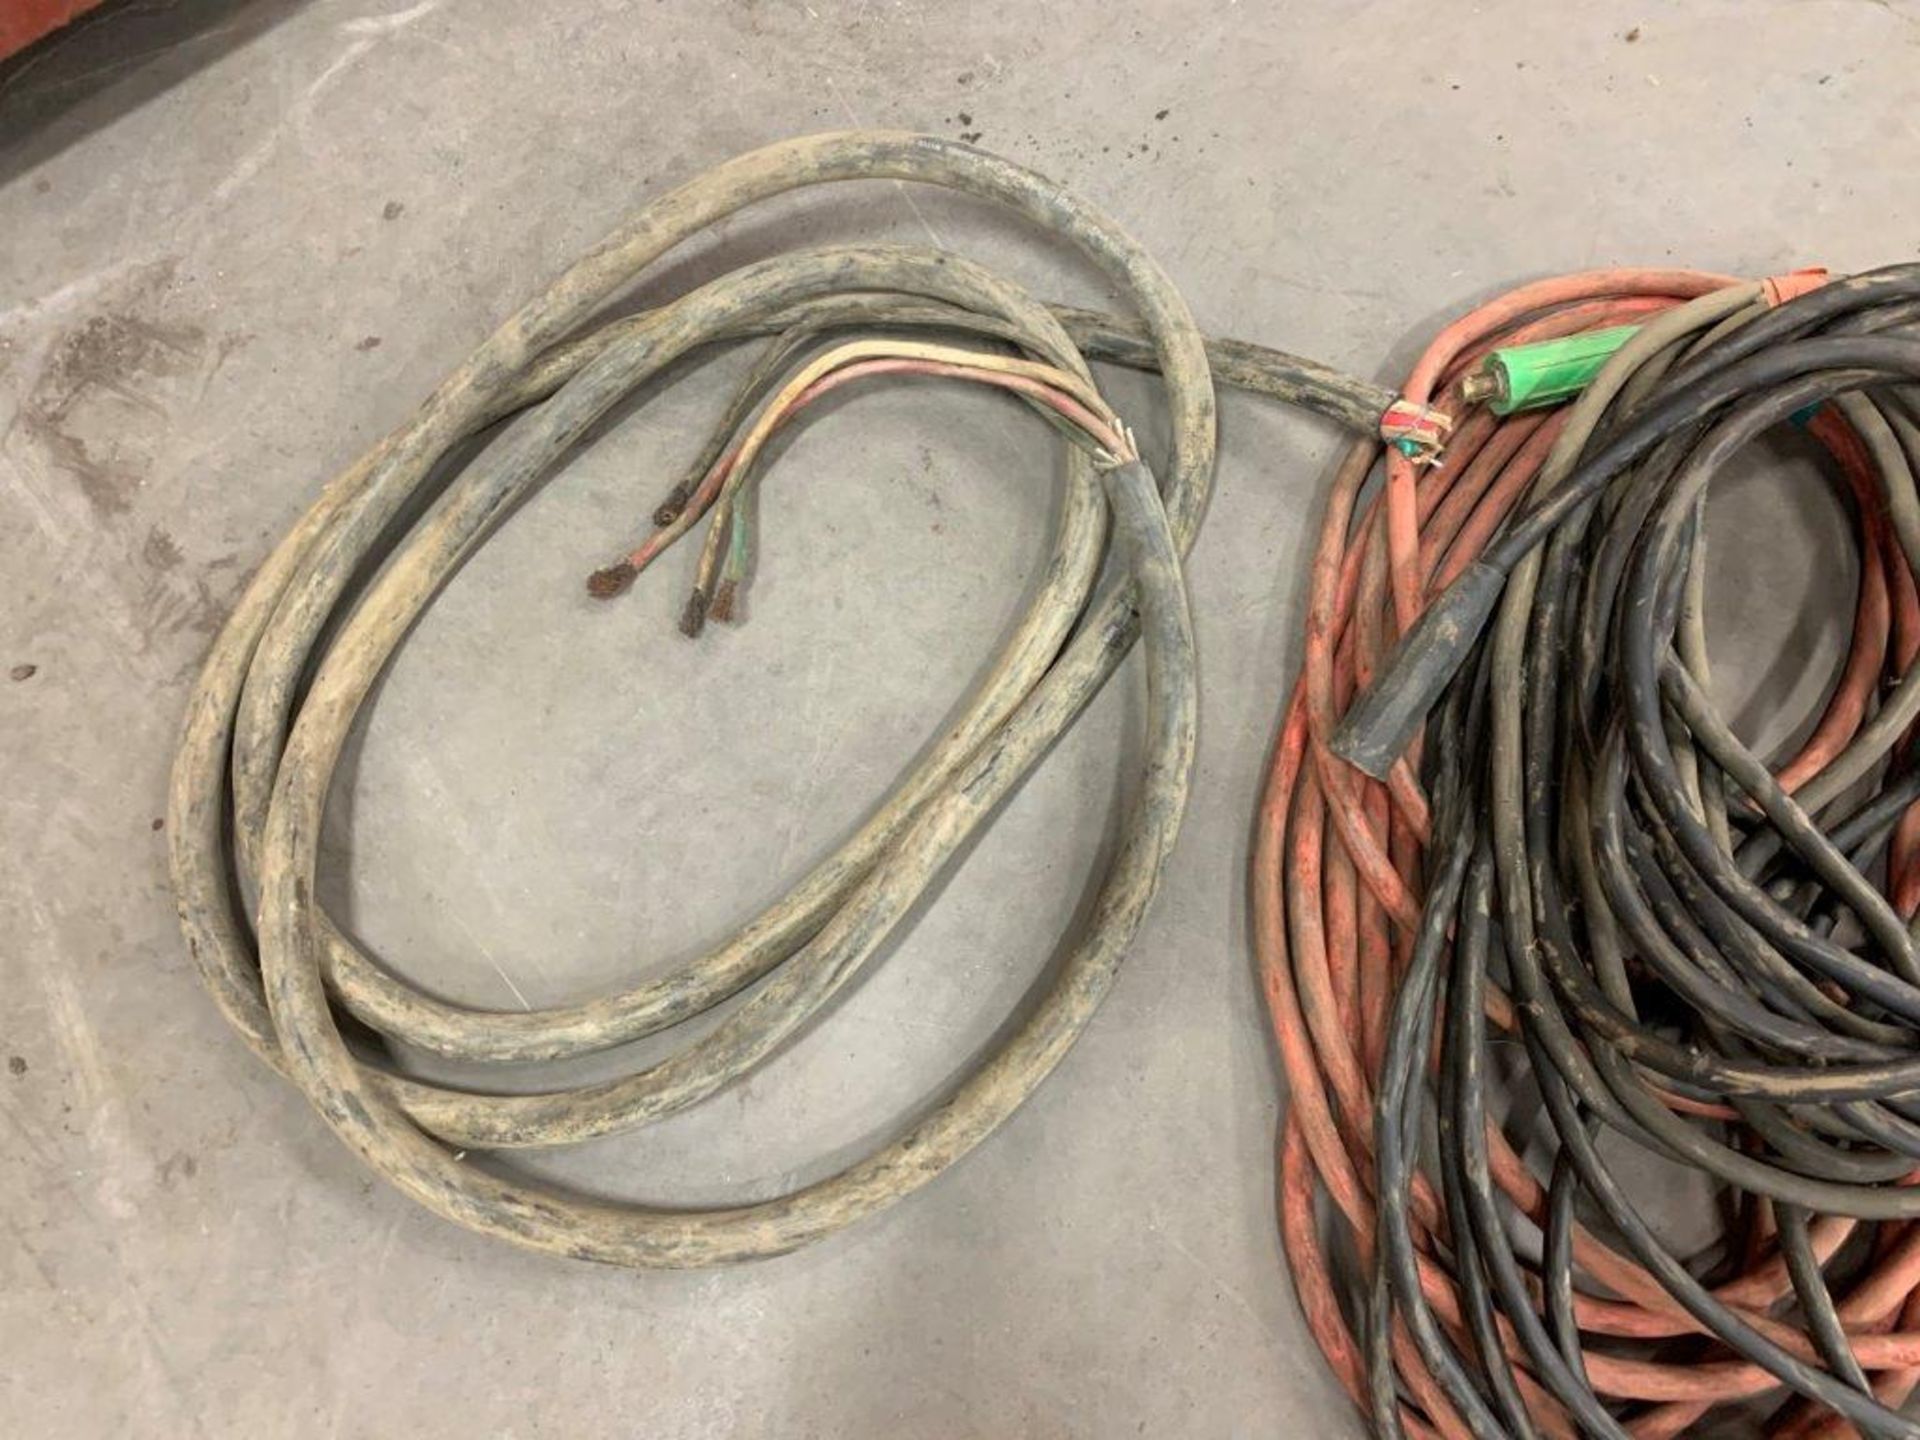 L/O MIG WELDING WIRE AND CABLES - Image 5 of 5